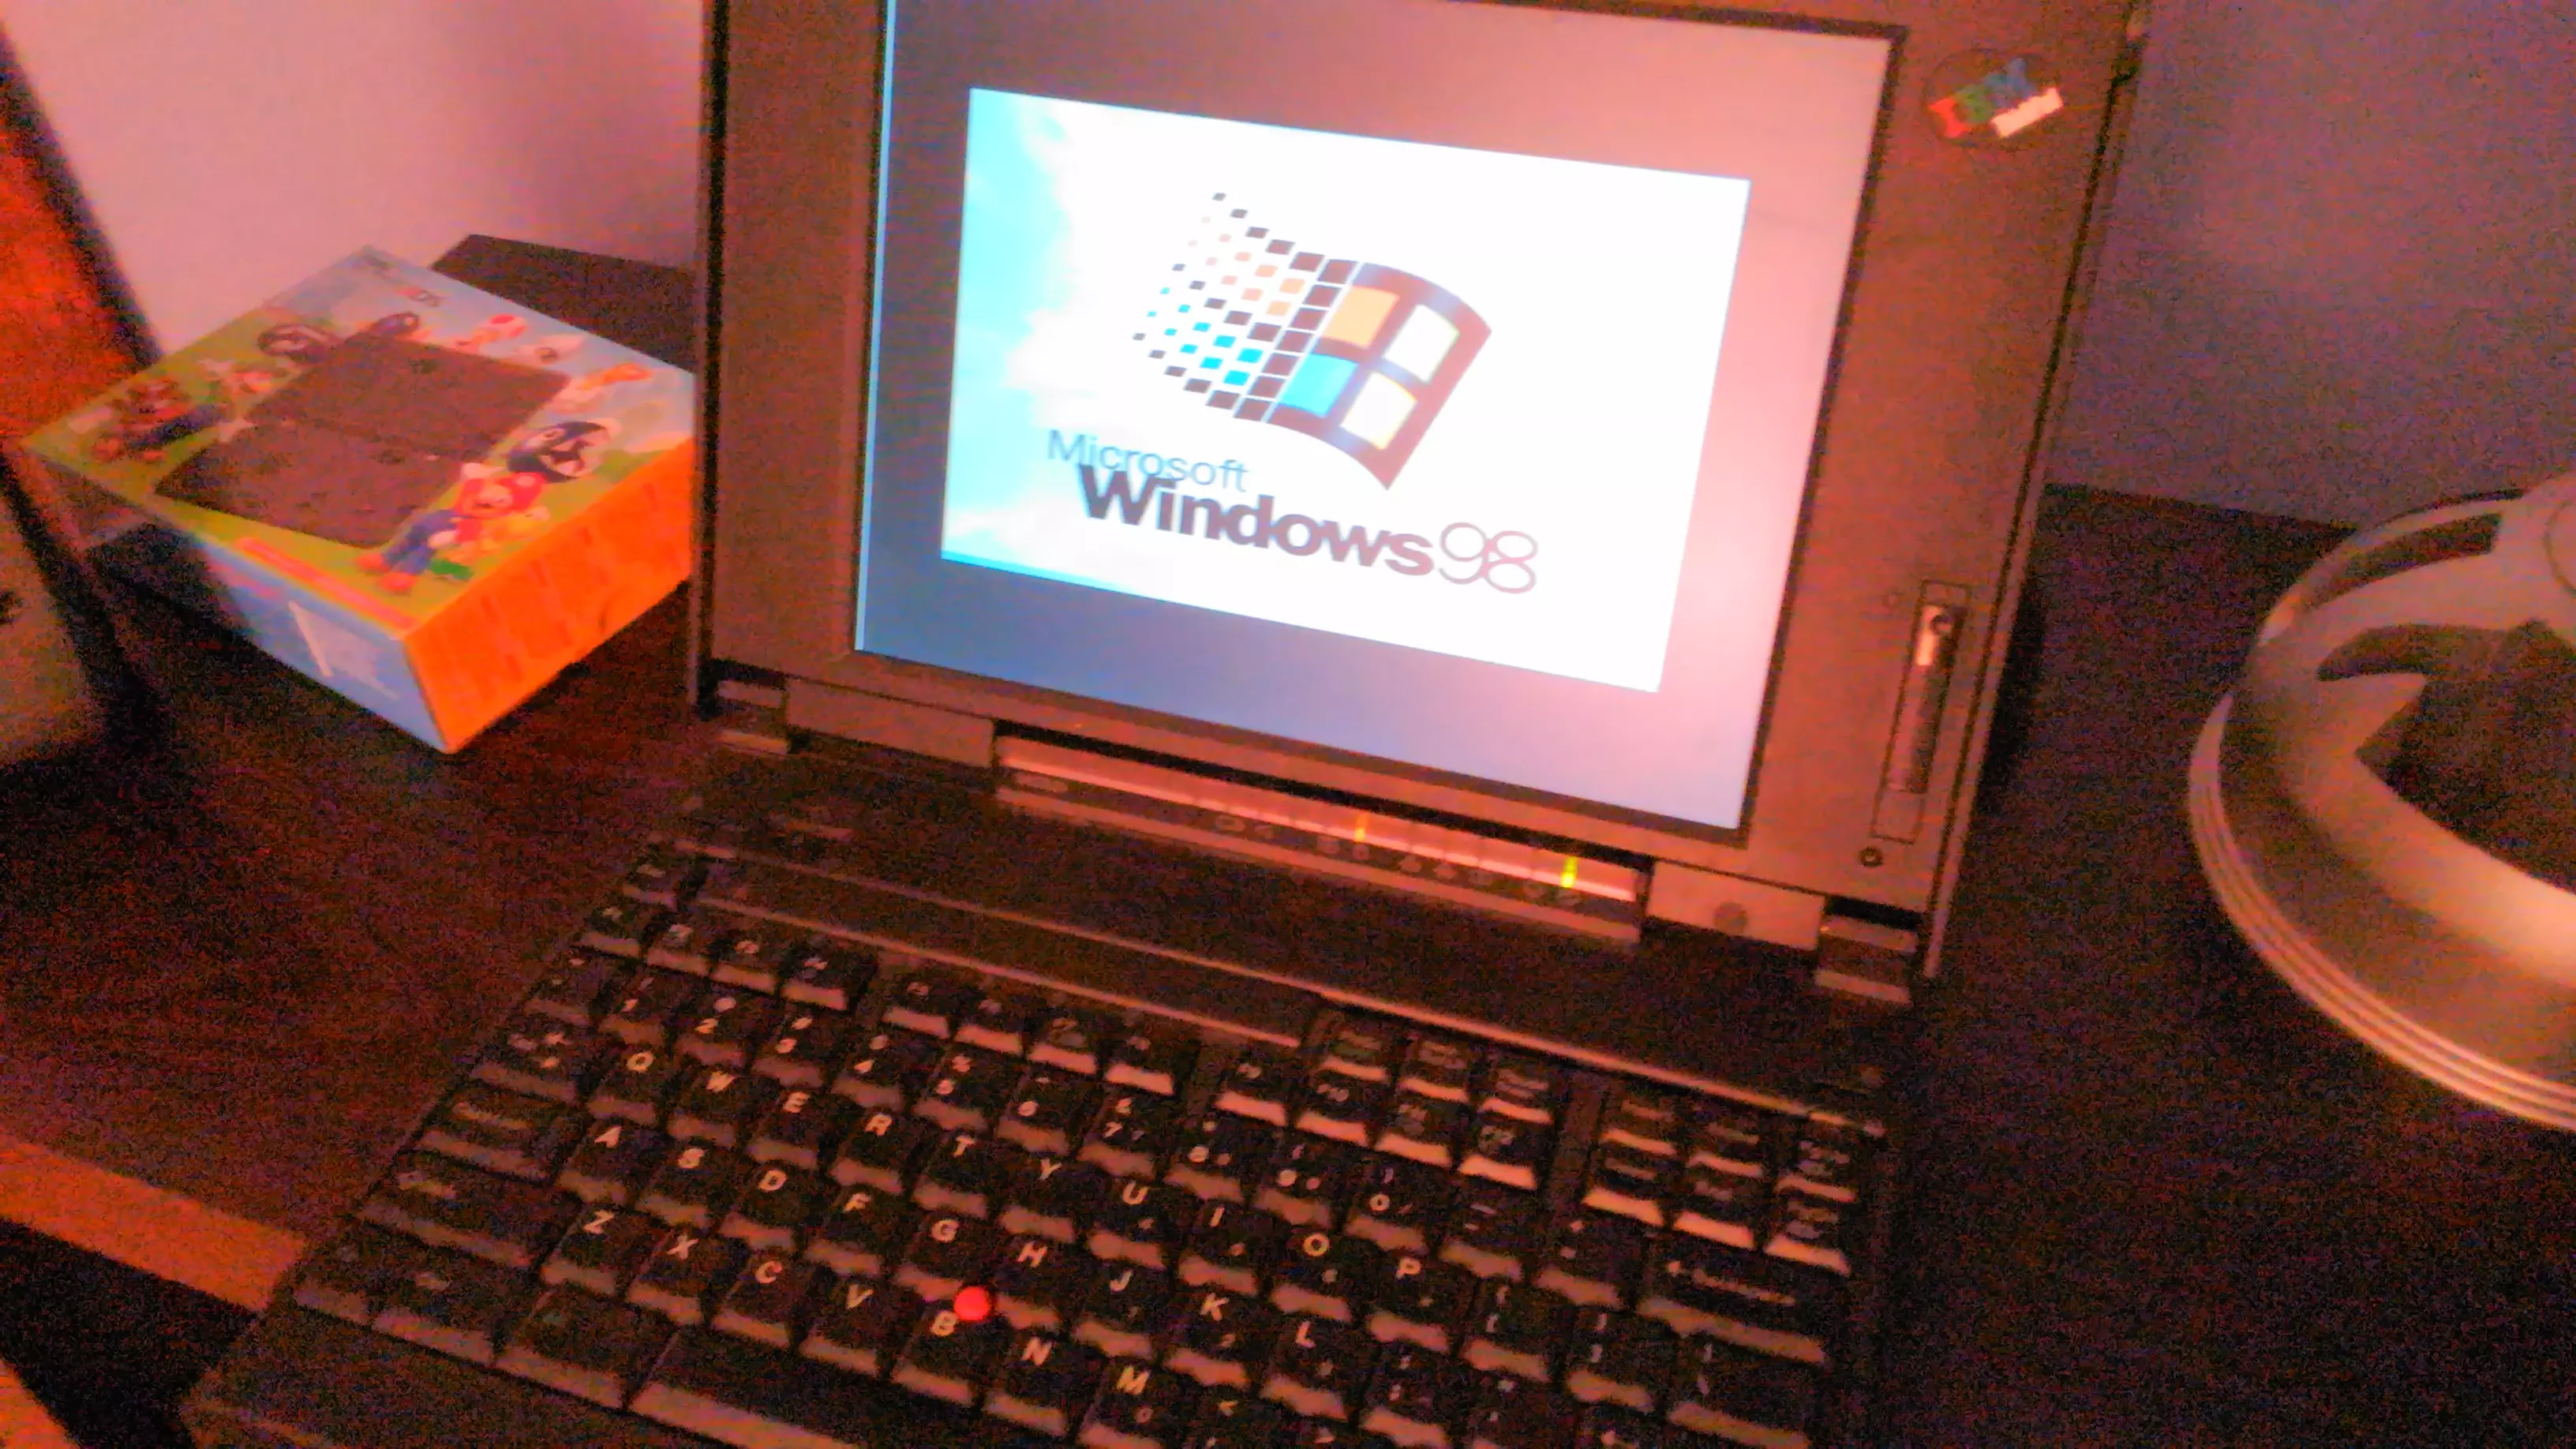 Man Buys An Old Laptop And Gets A Massive Surprise When He Turns It On